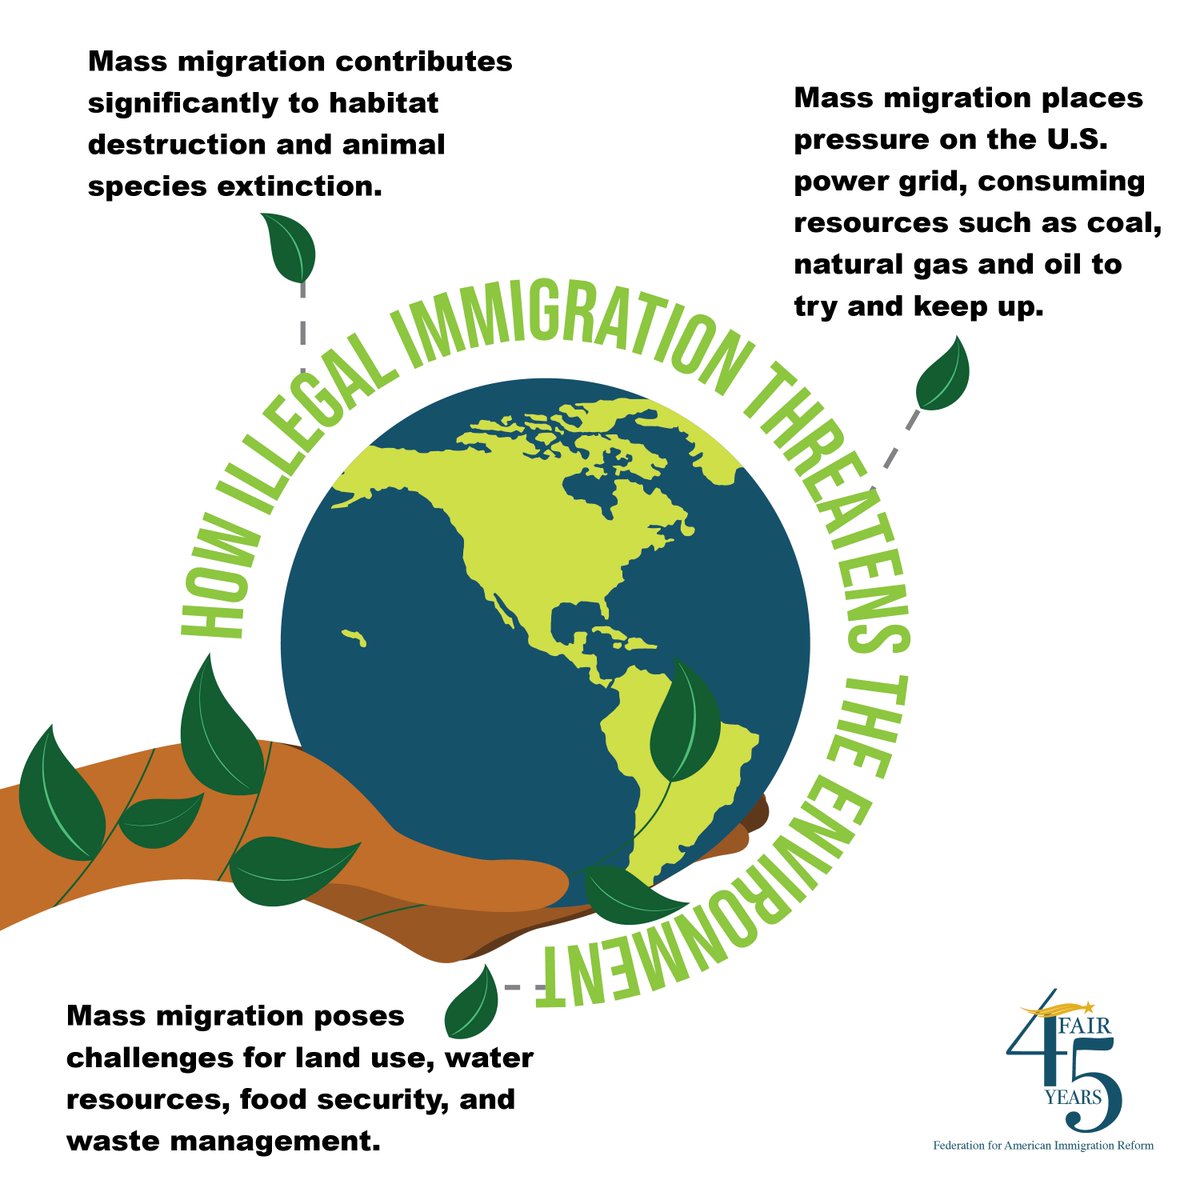 The effect illegal immigration has on our environment is often overlooked, but illegal migration is literally changing the world as we know it, with irreversible dire consequences. #EarthDay